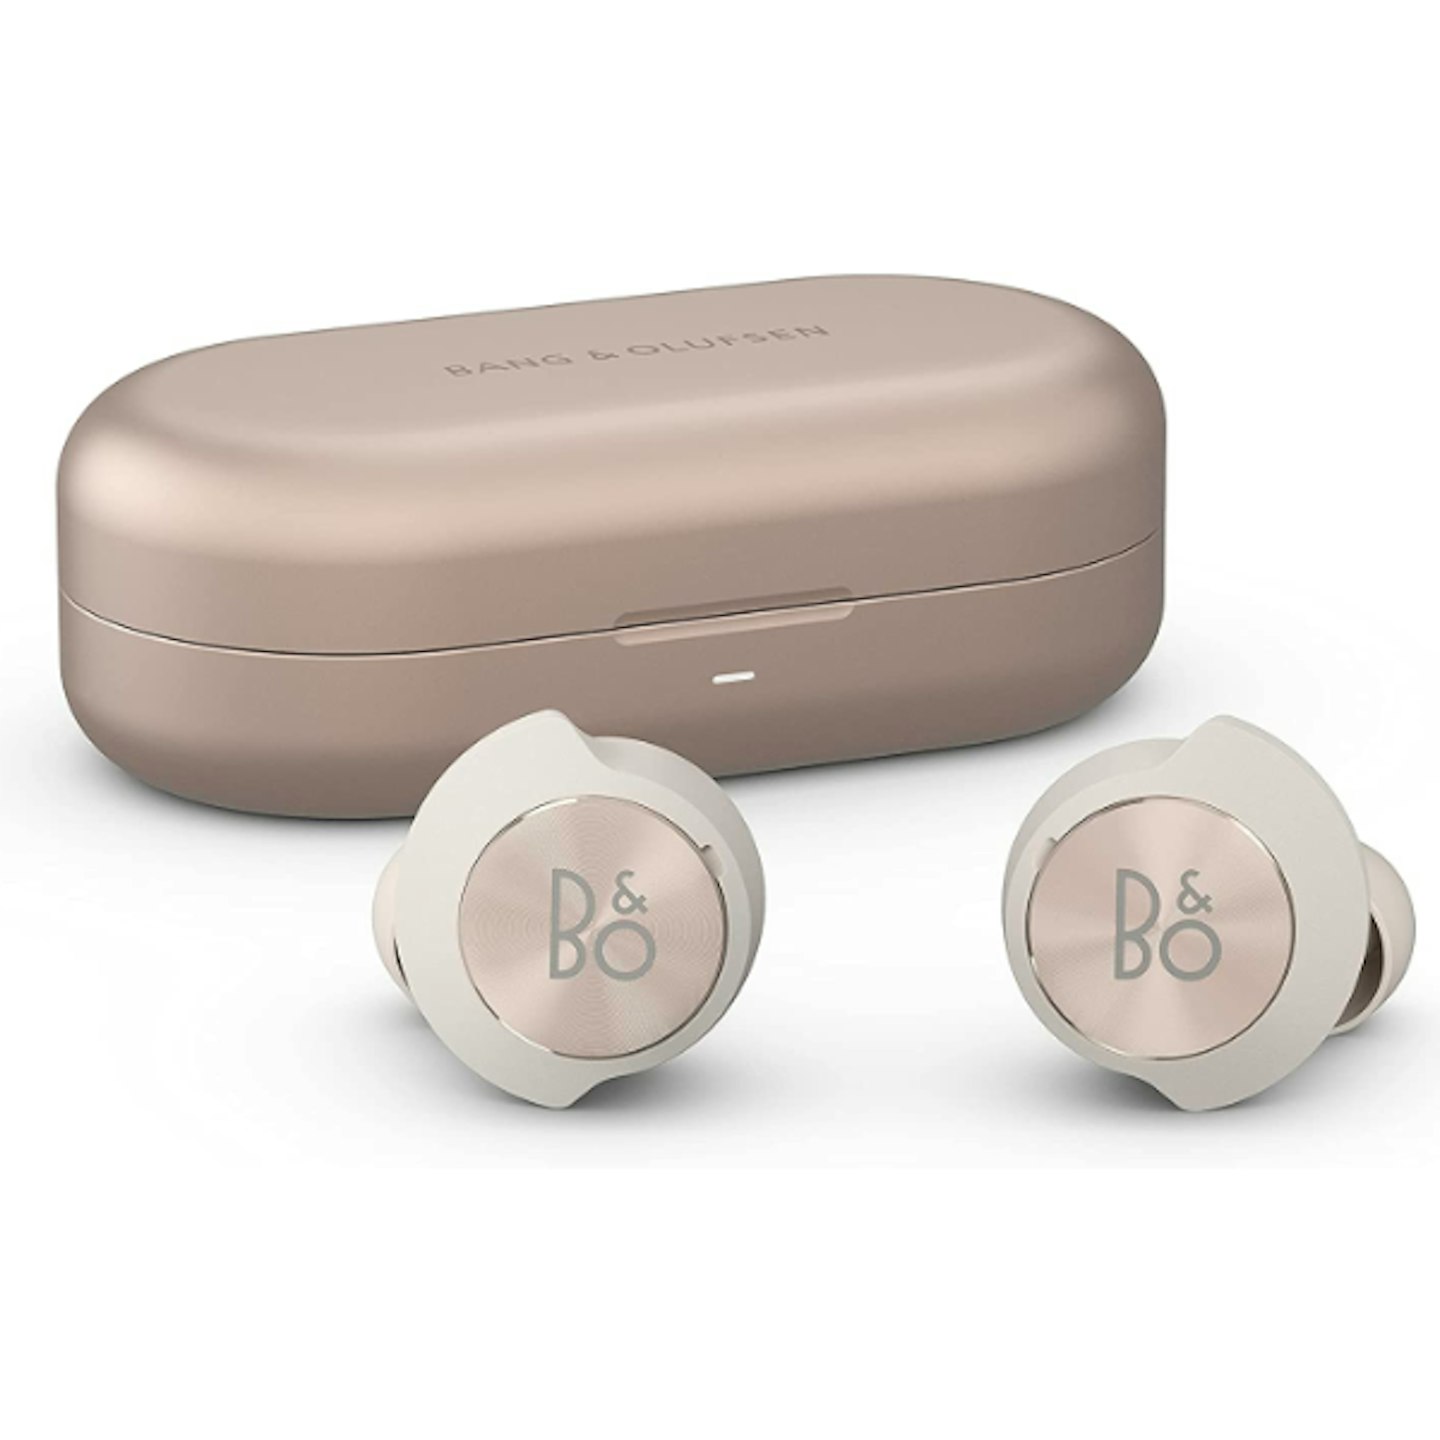 Bang & Olufsen Beoplay EQ Active Noise Cancelling Wireless Earphones